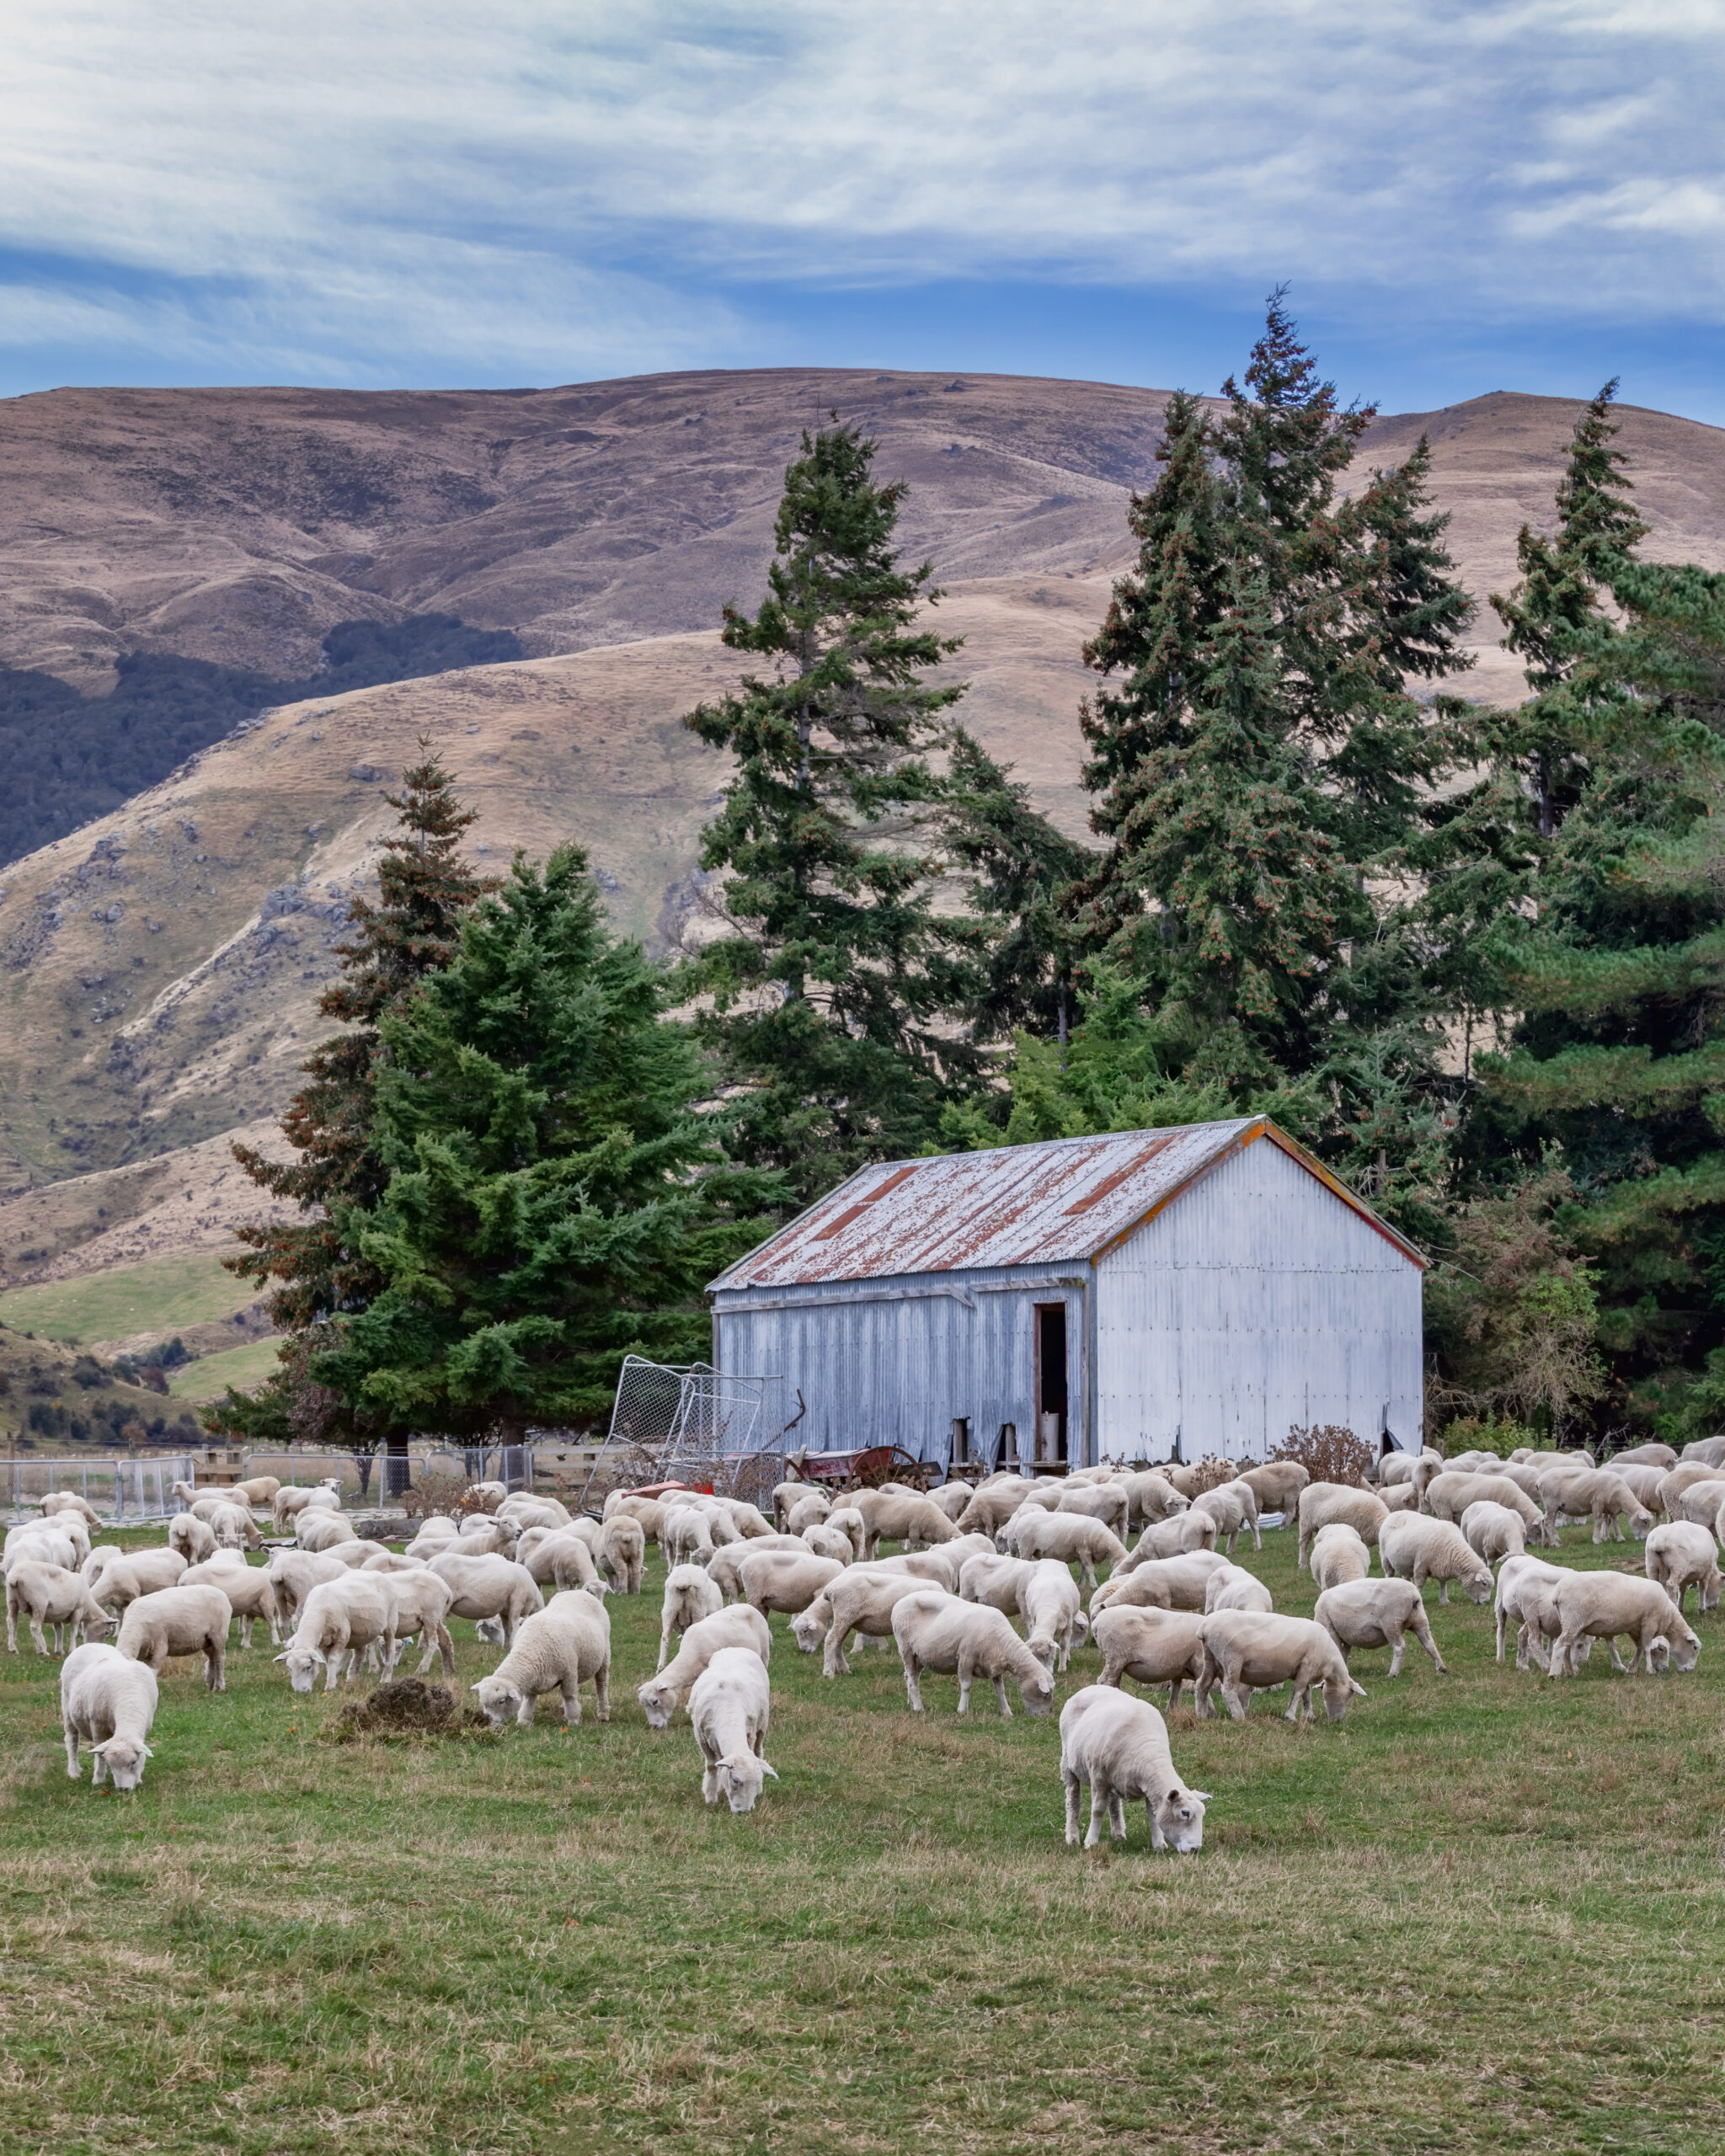 A landscape scene in rural South Island of New Zealand in autumn with sheep in a paddock and a barn, trees and mountains in the background.